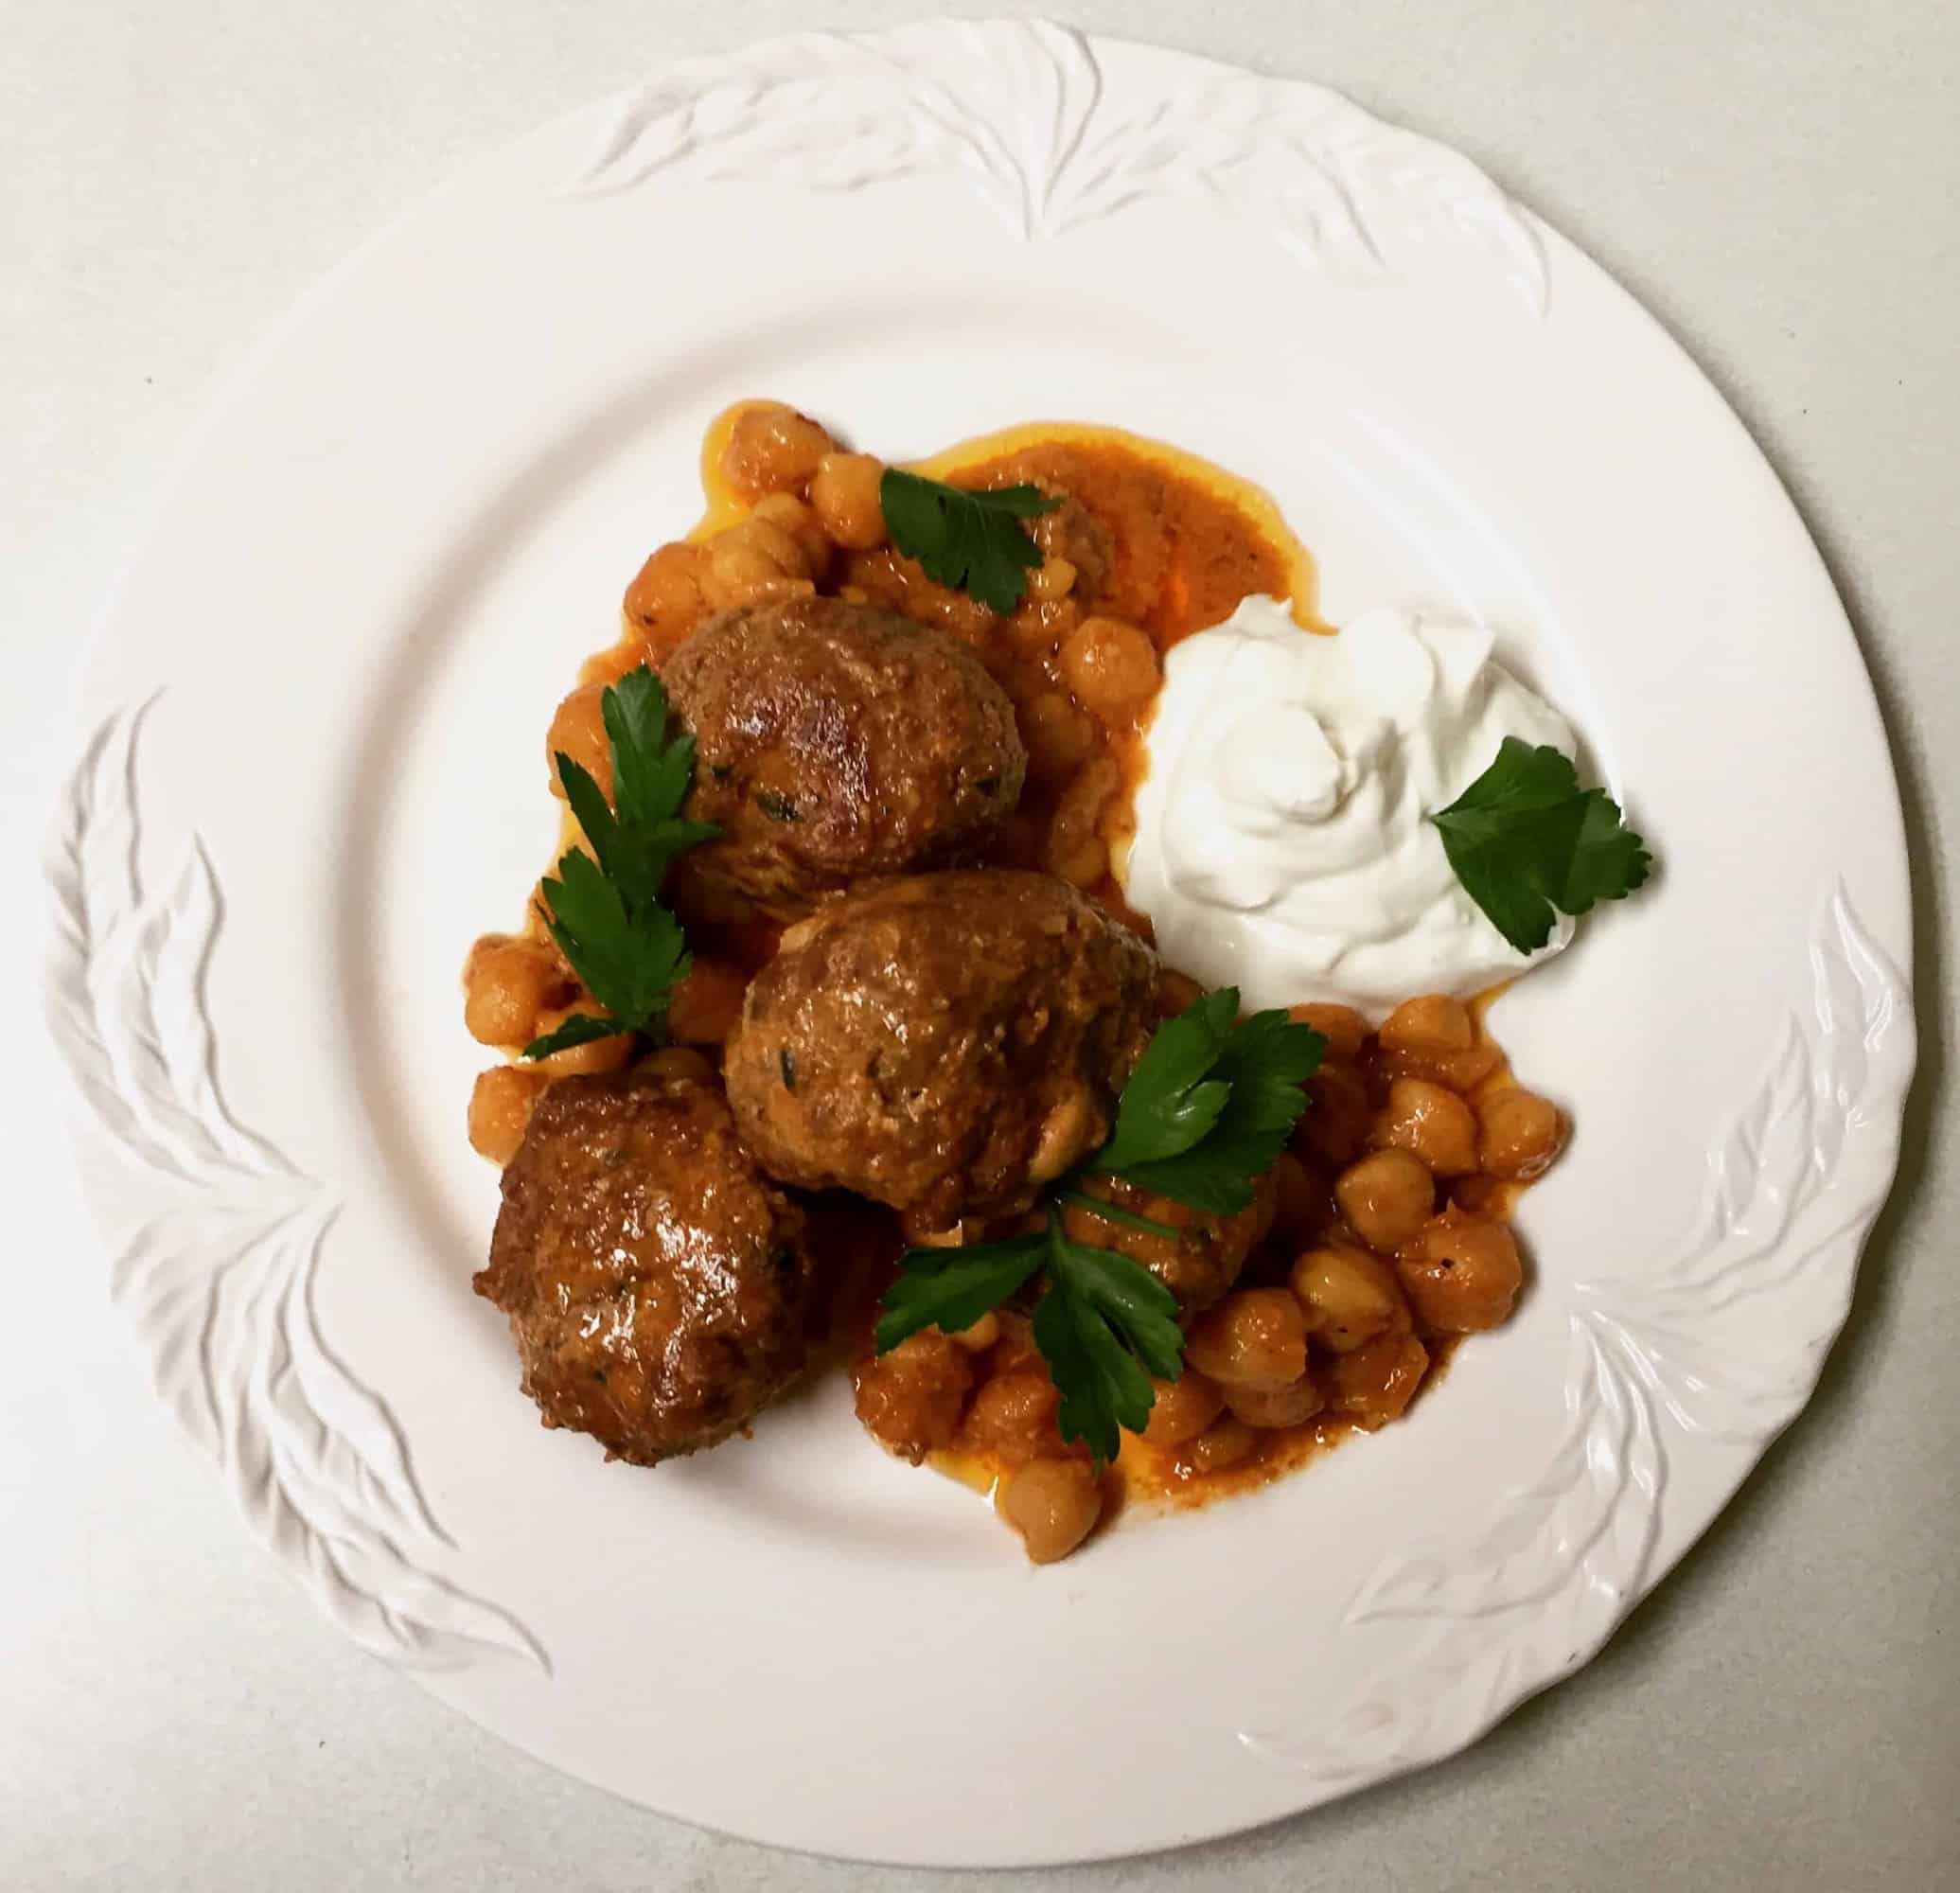 Lamb Meatballs with Red Pepper and Chickpea Sauce from Nancy Silverton of Campanile in Los Angeles